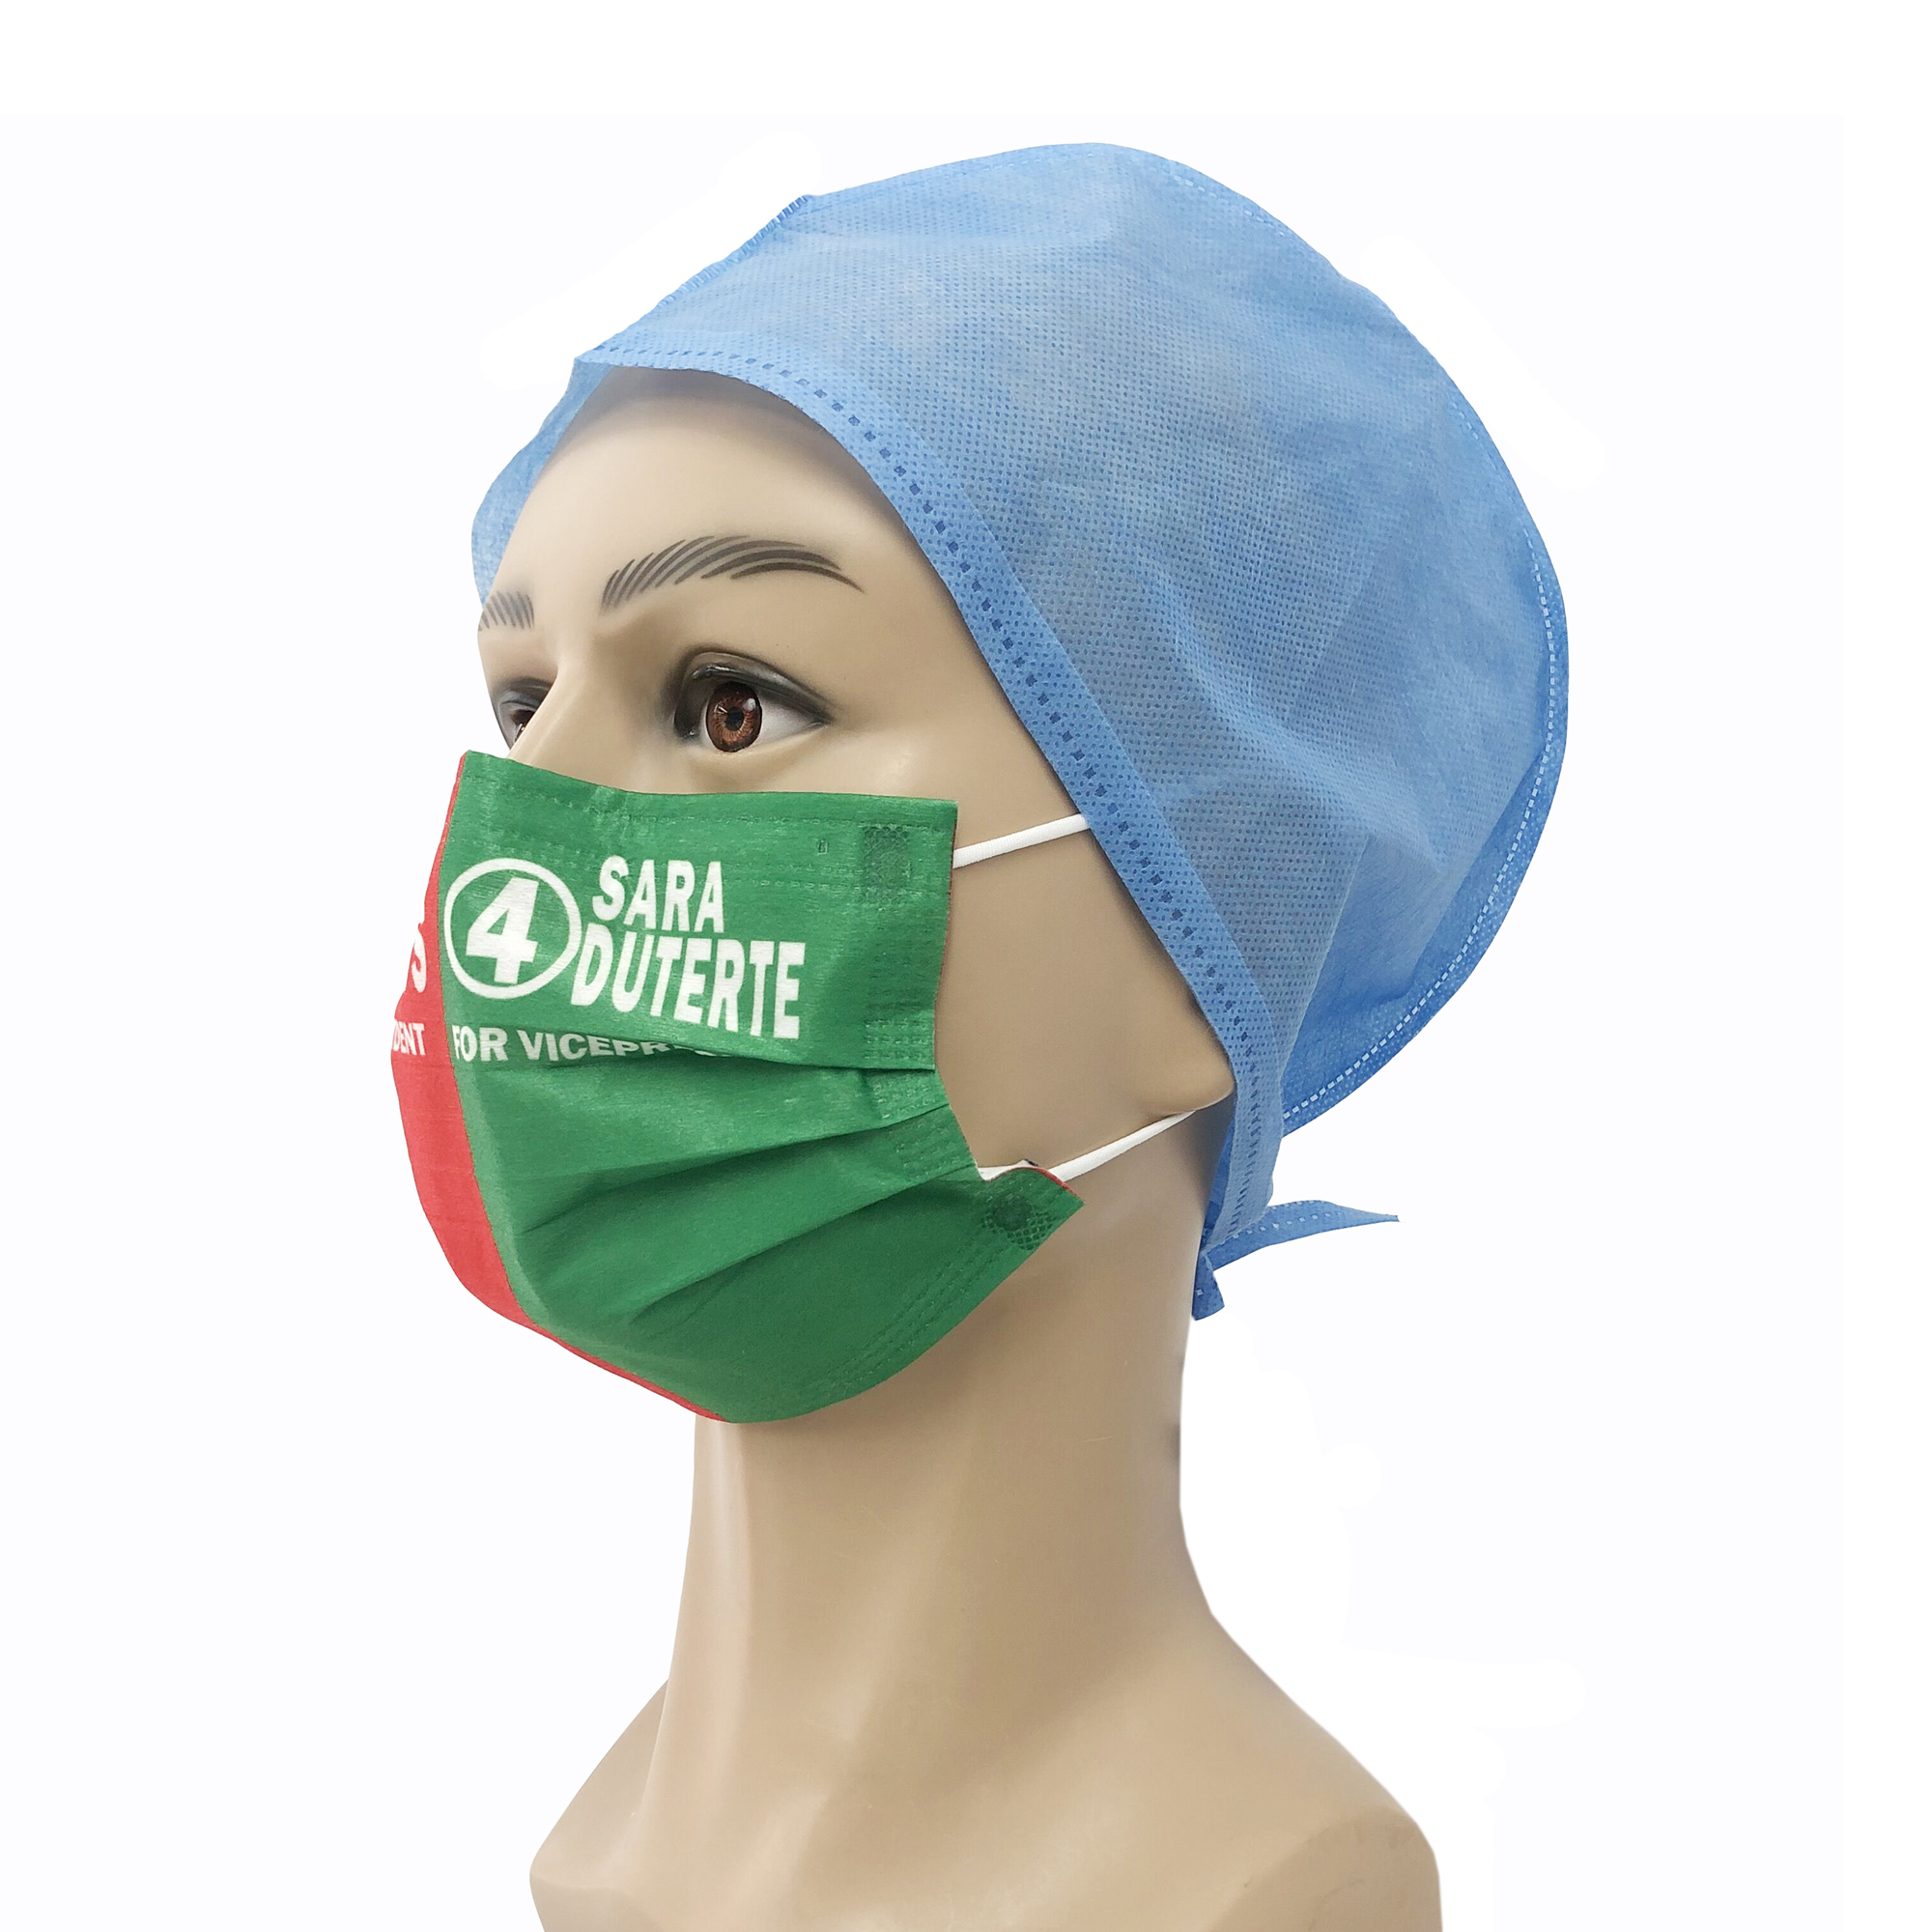 ASTM F2100 LEVEL 3 test report disposable medical face mask 